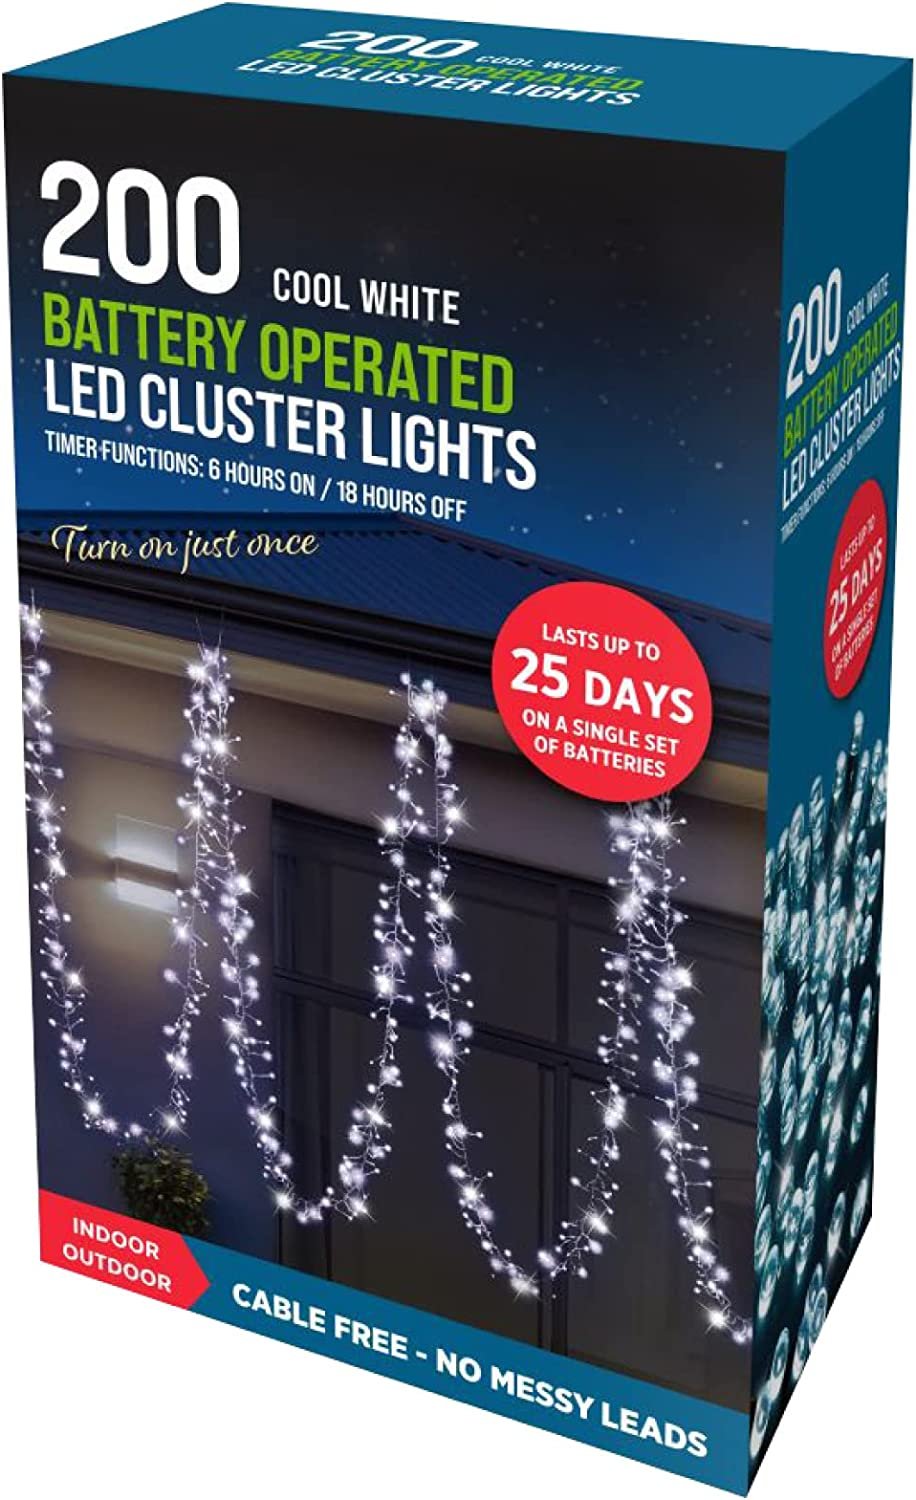 STERUN Battery Operated 200 Cluster LED Lights with Timer Function & IP44 Ideal for Christmas Decoration | Led String Lights | String Lights Battery Operated | Lights